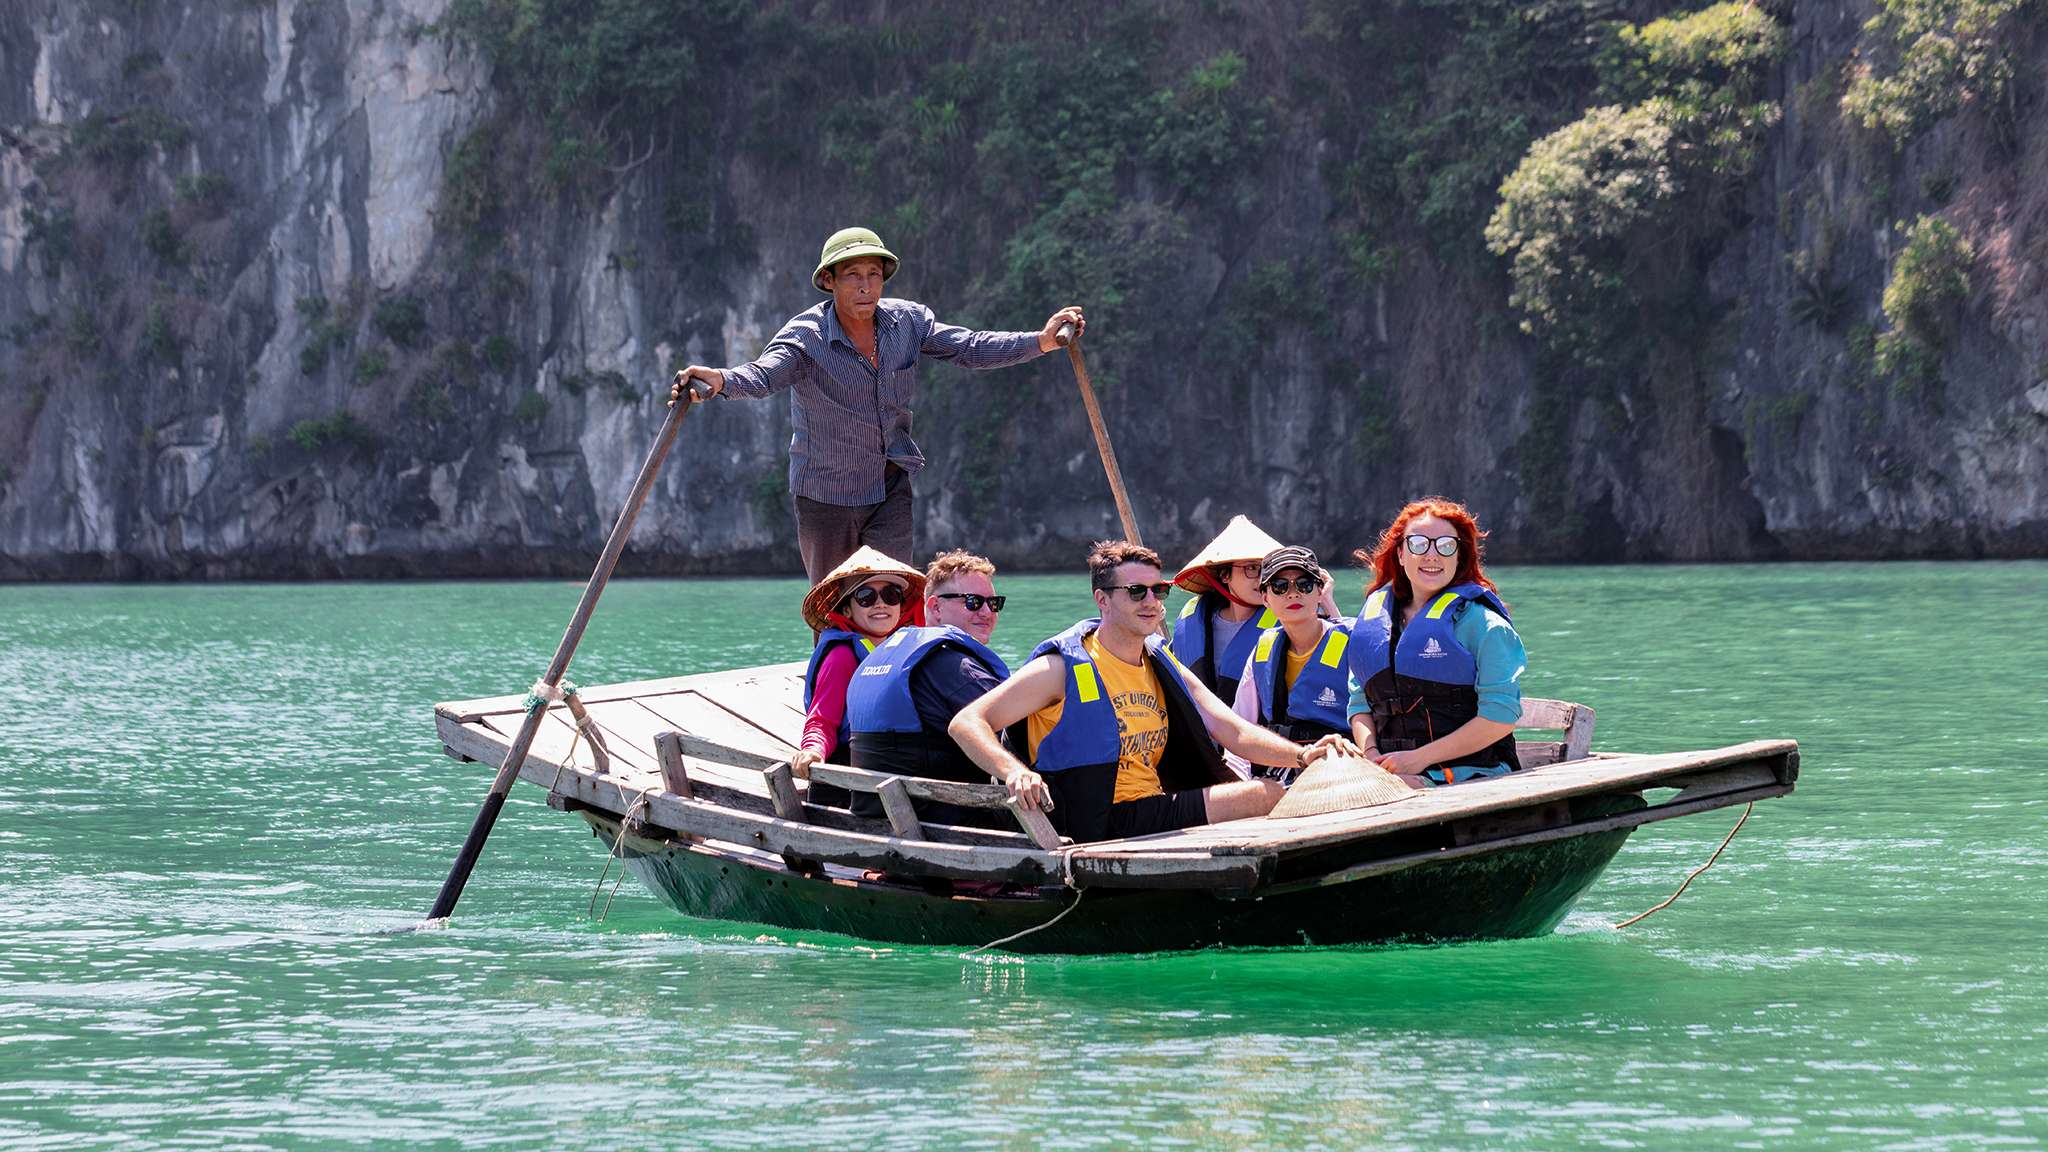 Explore the masjestic caves by bamboo boat